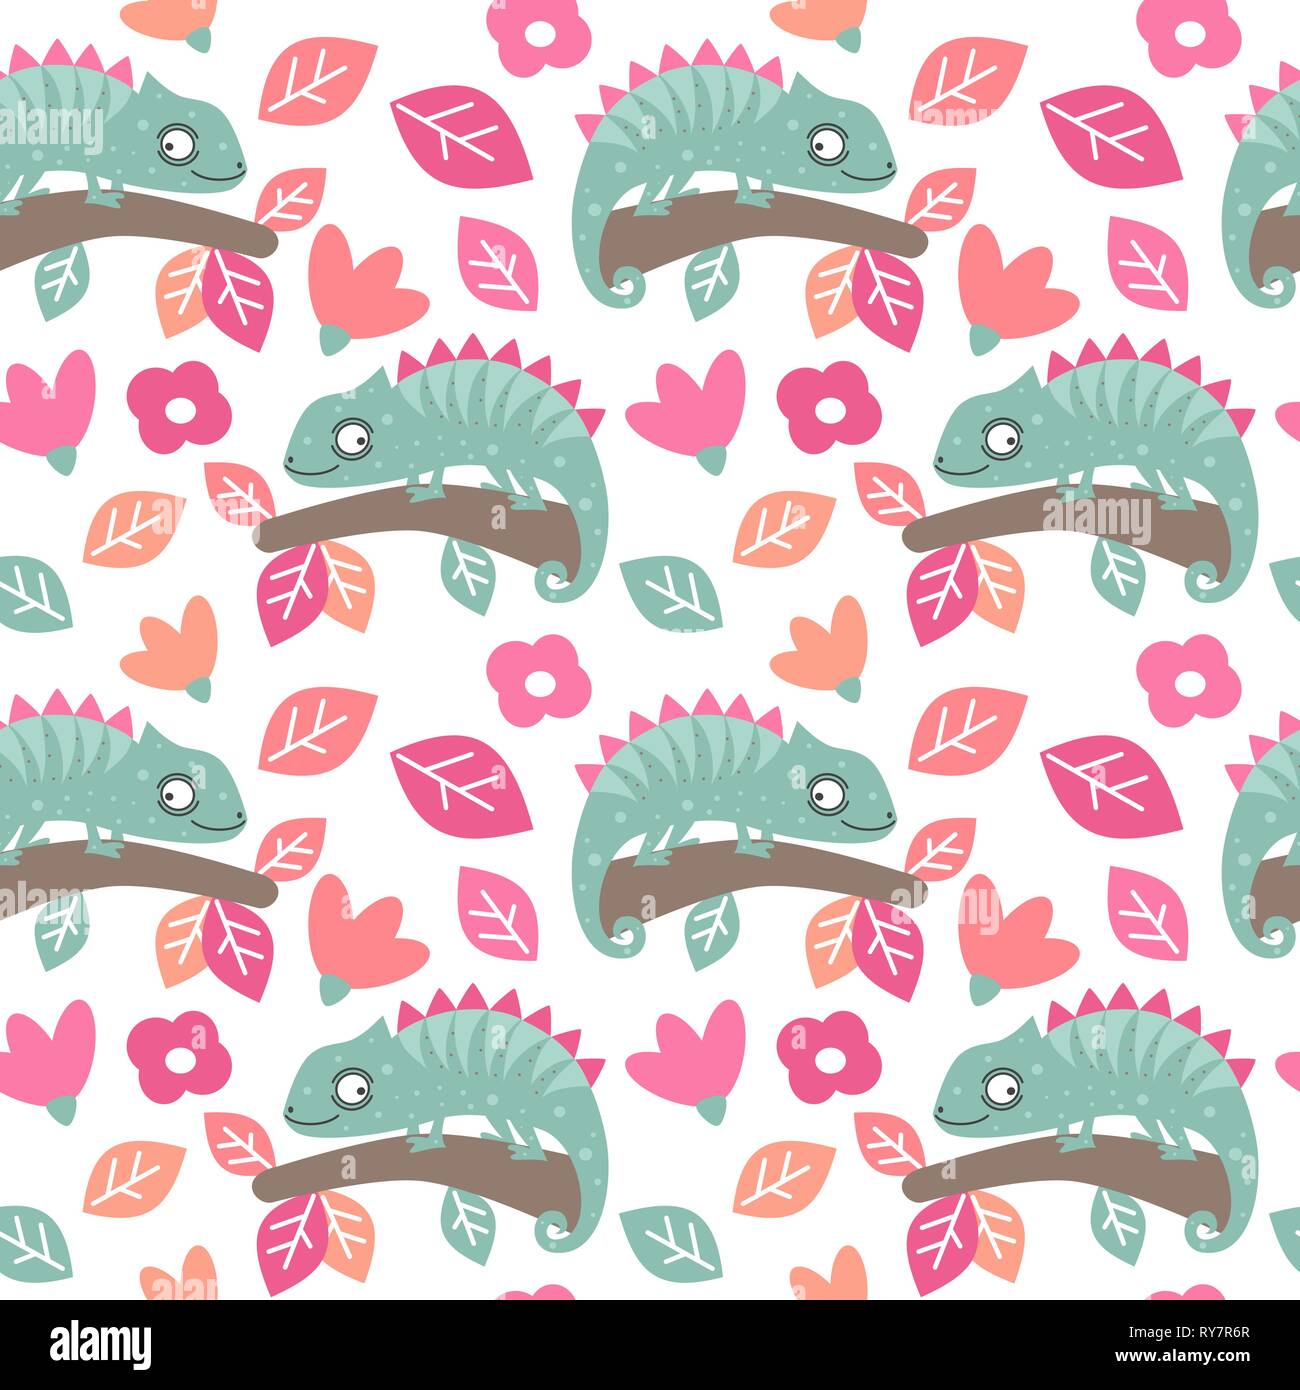 cute colorful seamless vector pattern background illustration with chameleons, leaves and flowers Stock Vector